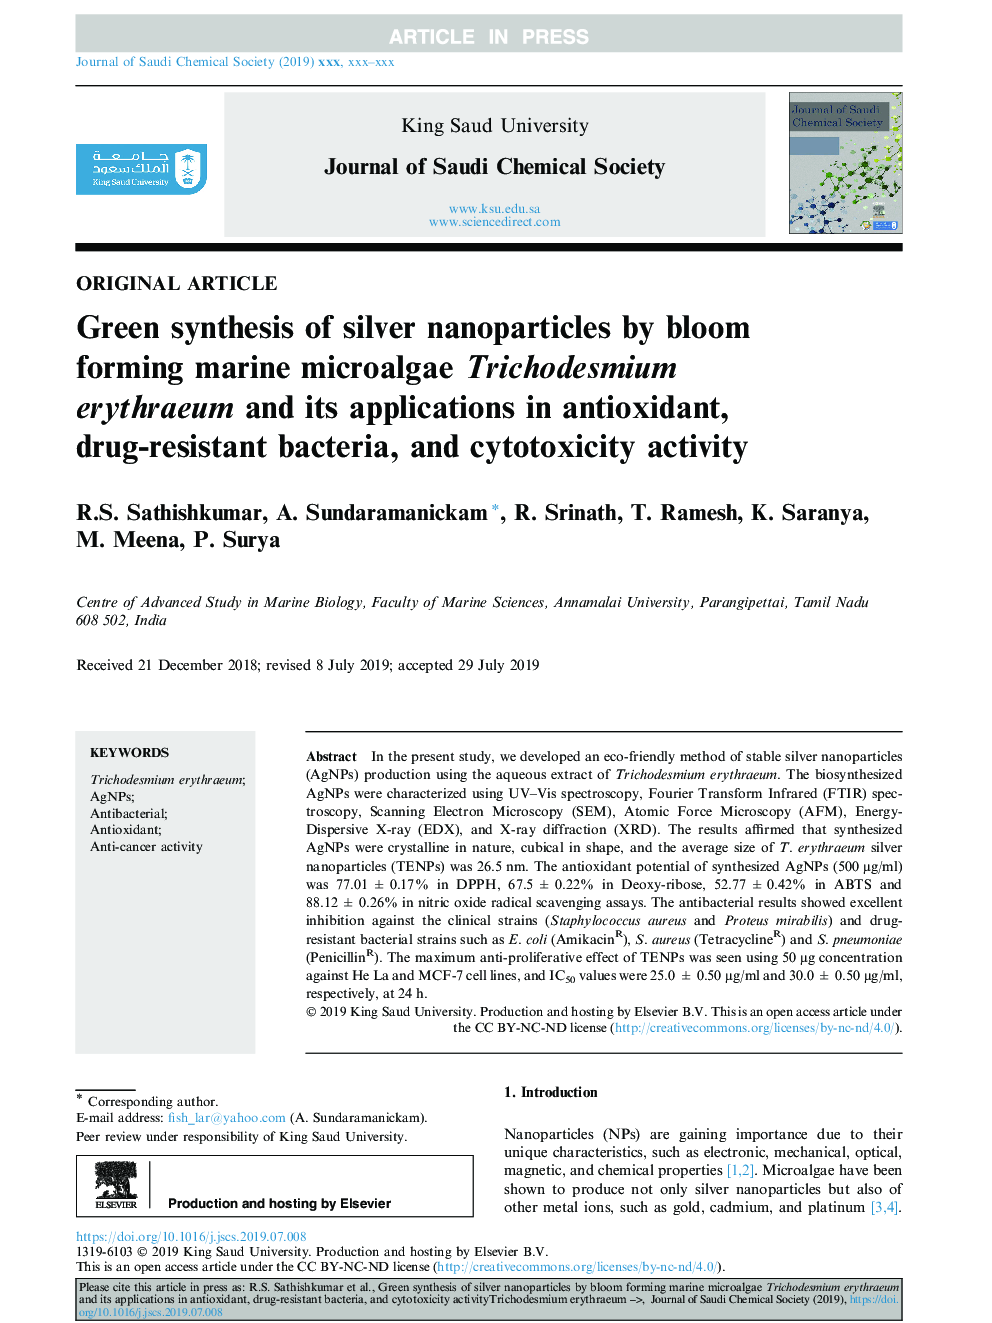 Green synthesis of silver nanoparticles by bloom forming marine microalgae Trichodesmium erythraeum and its applications in antioxidant, drug-resistant bacteria, and cytotoxicity activity